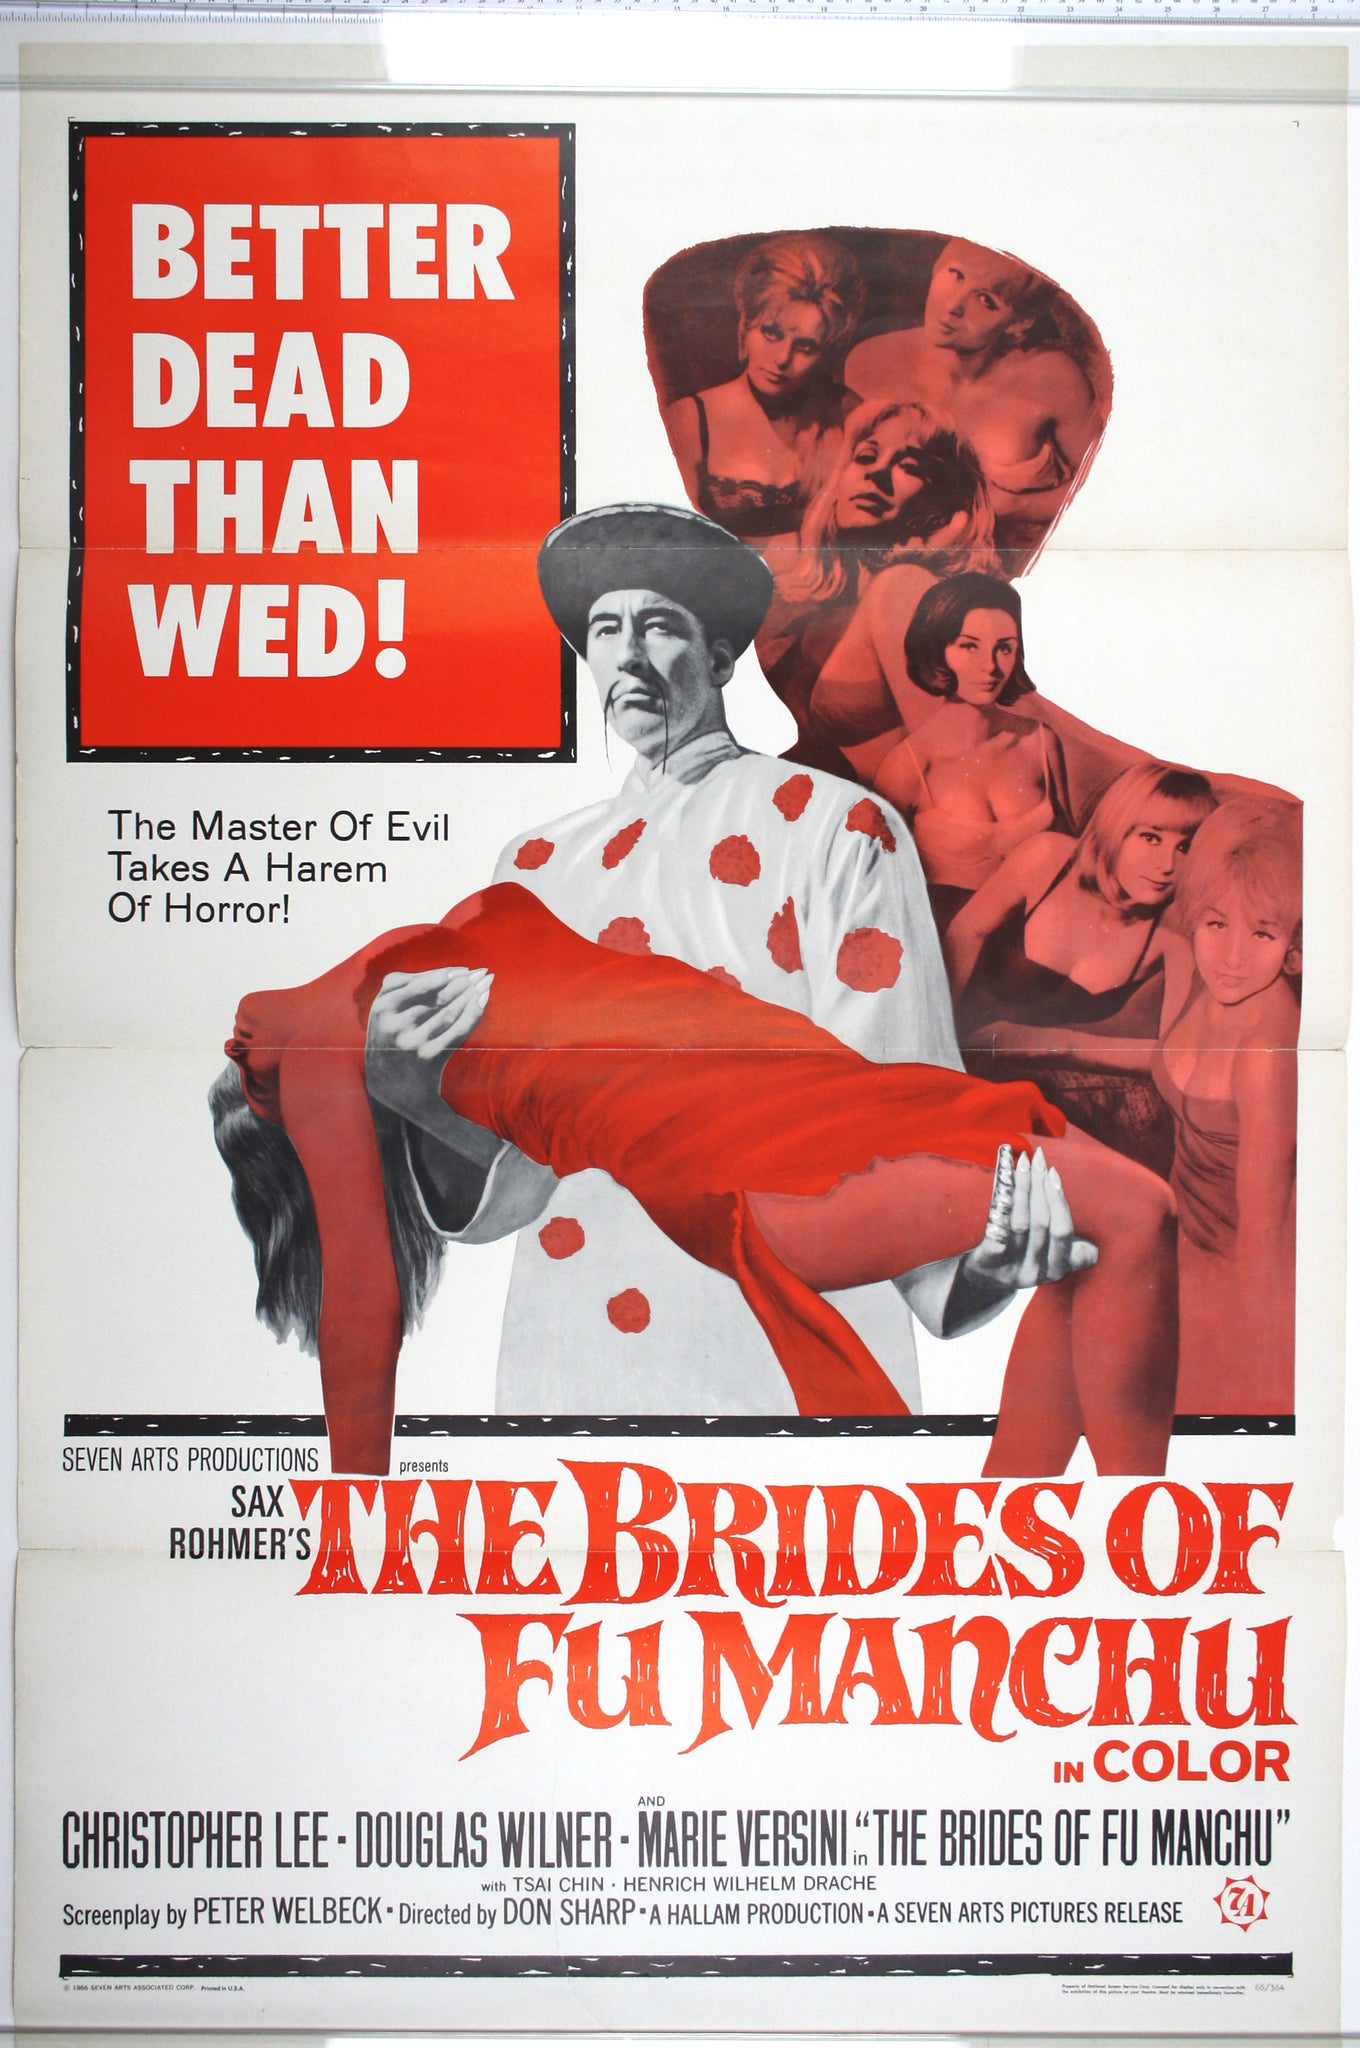 In red and black, centre shot of Lee holding fainted woman, as his cast shadow reveals his scantily-clad brides, with a Better Dead than Wed tagline.